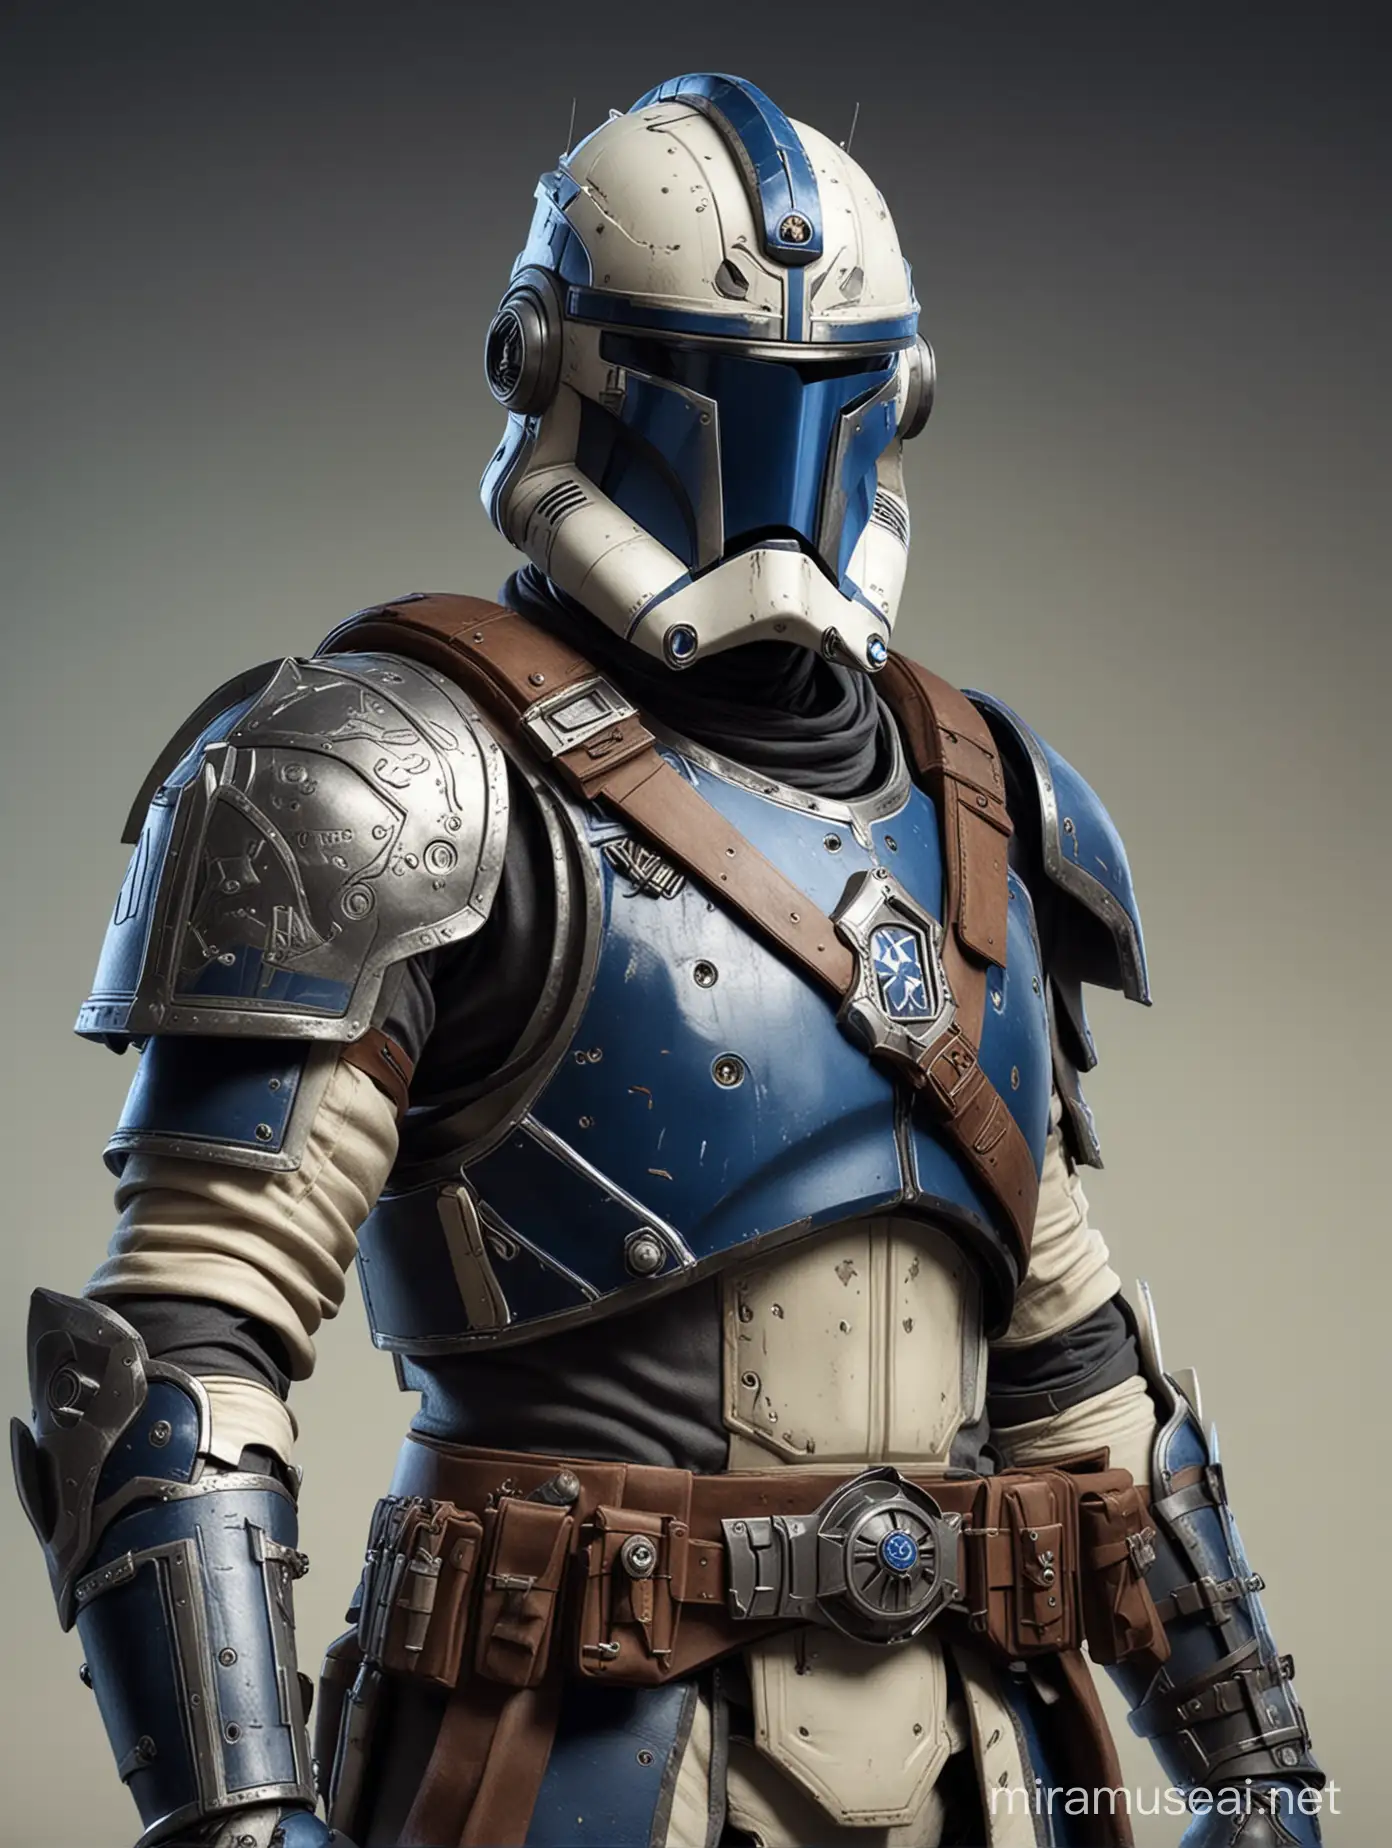 Medieval KnightStyle Captain Rex from Star Wars